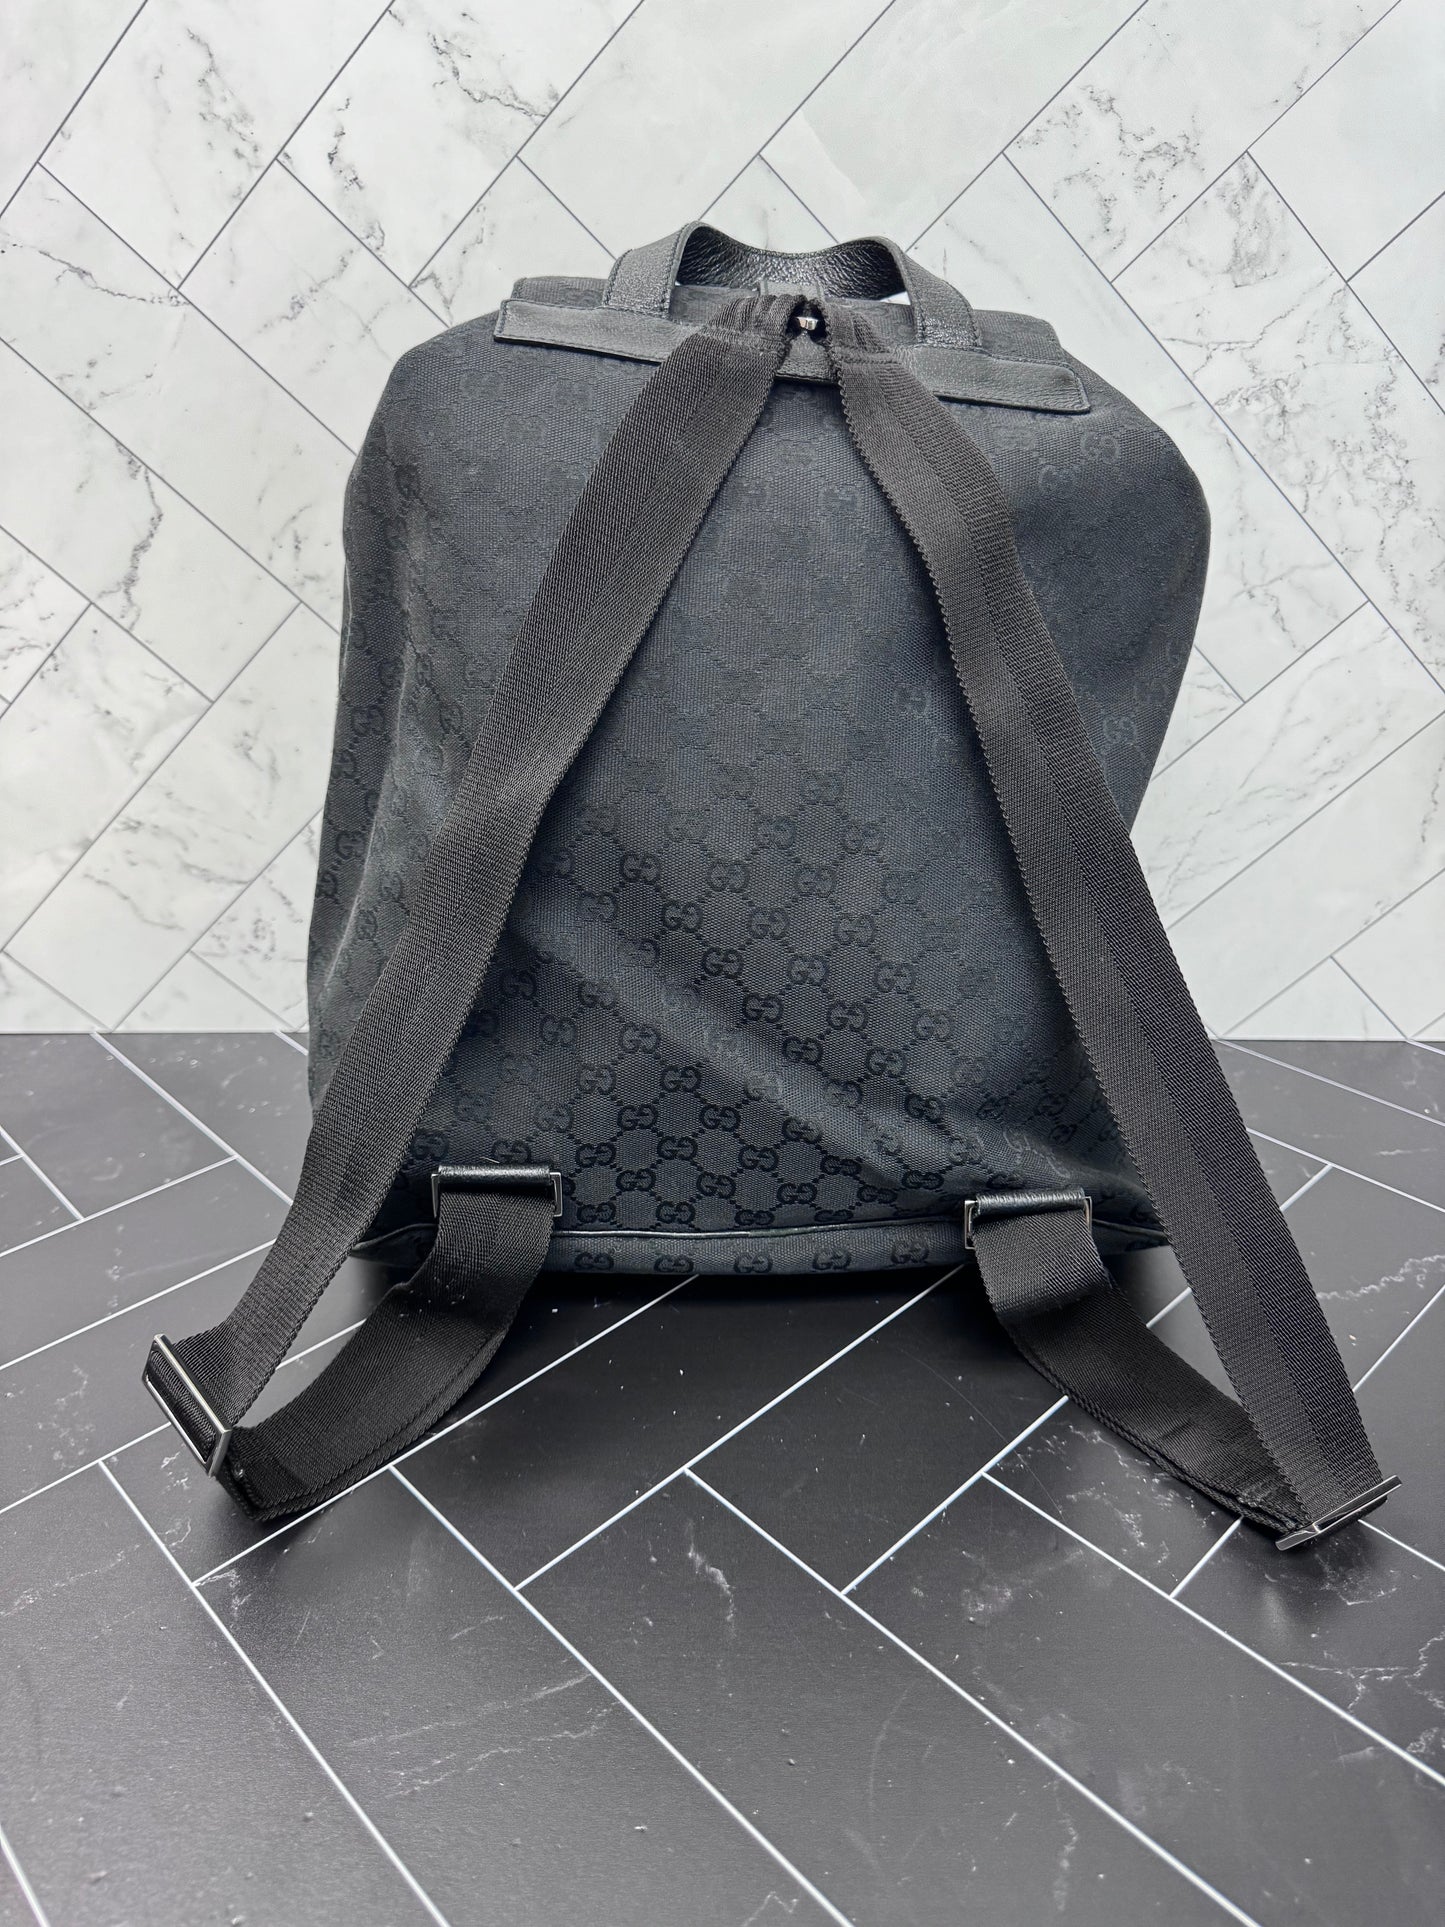 Gucci Black Canvas Backpack